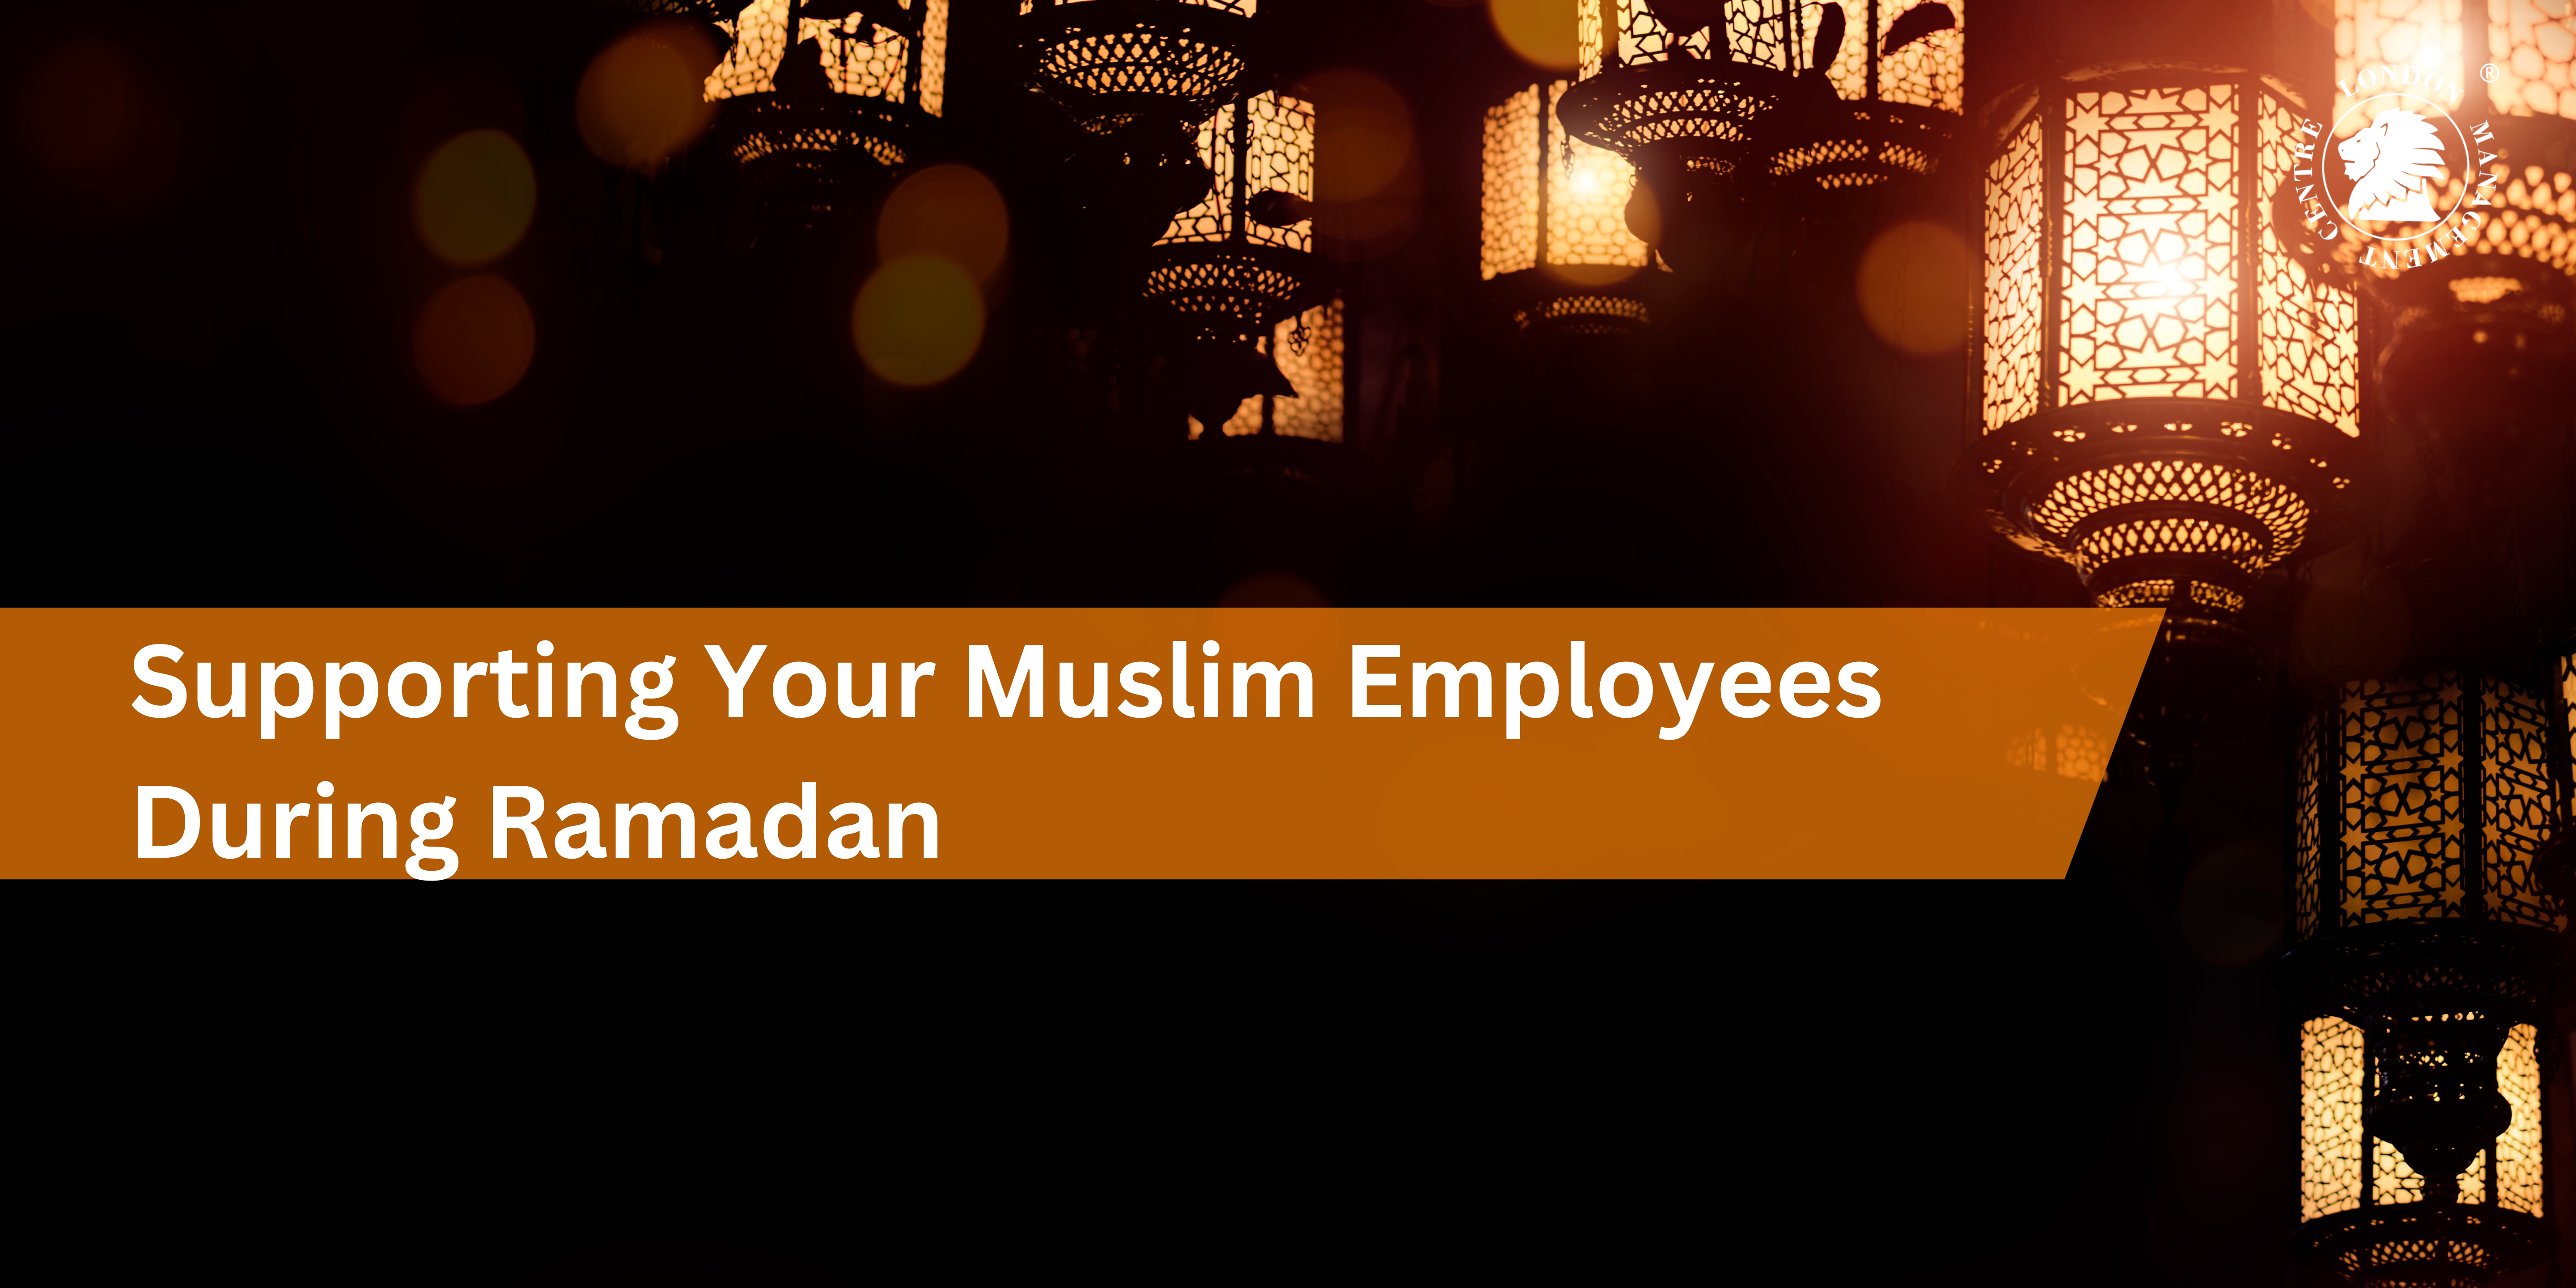 Supporting Your Muslim Employees During Ramadan